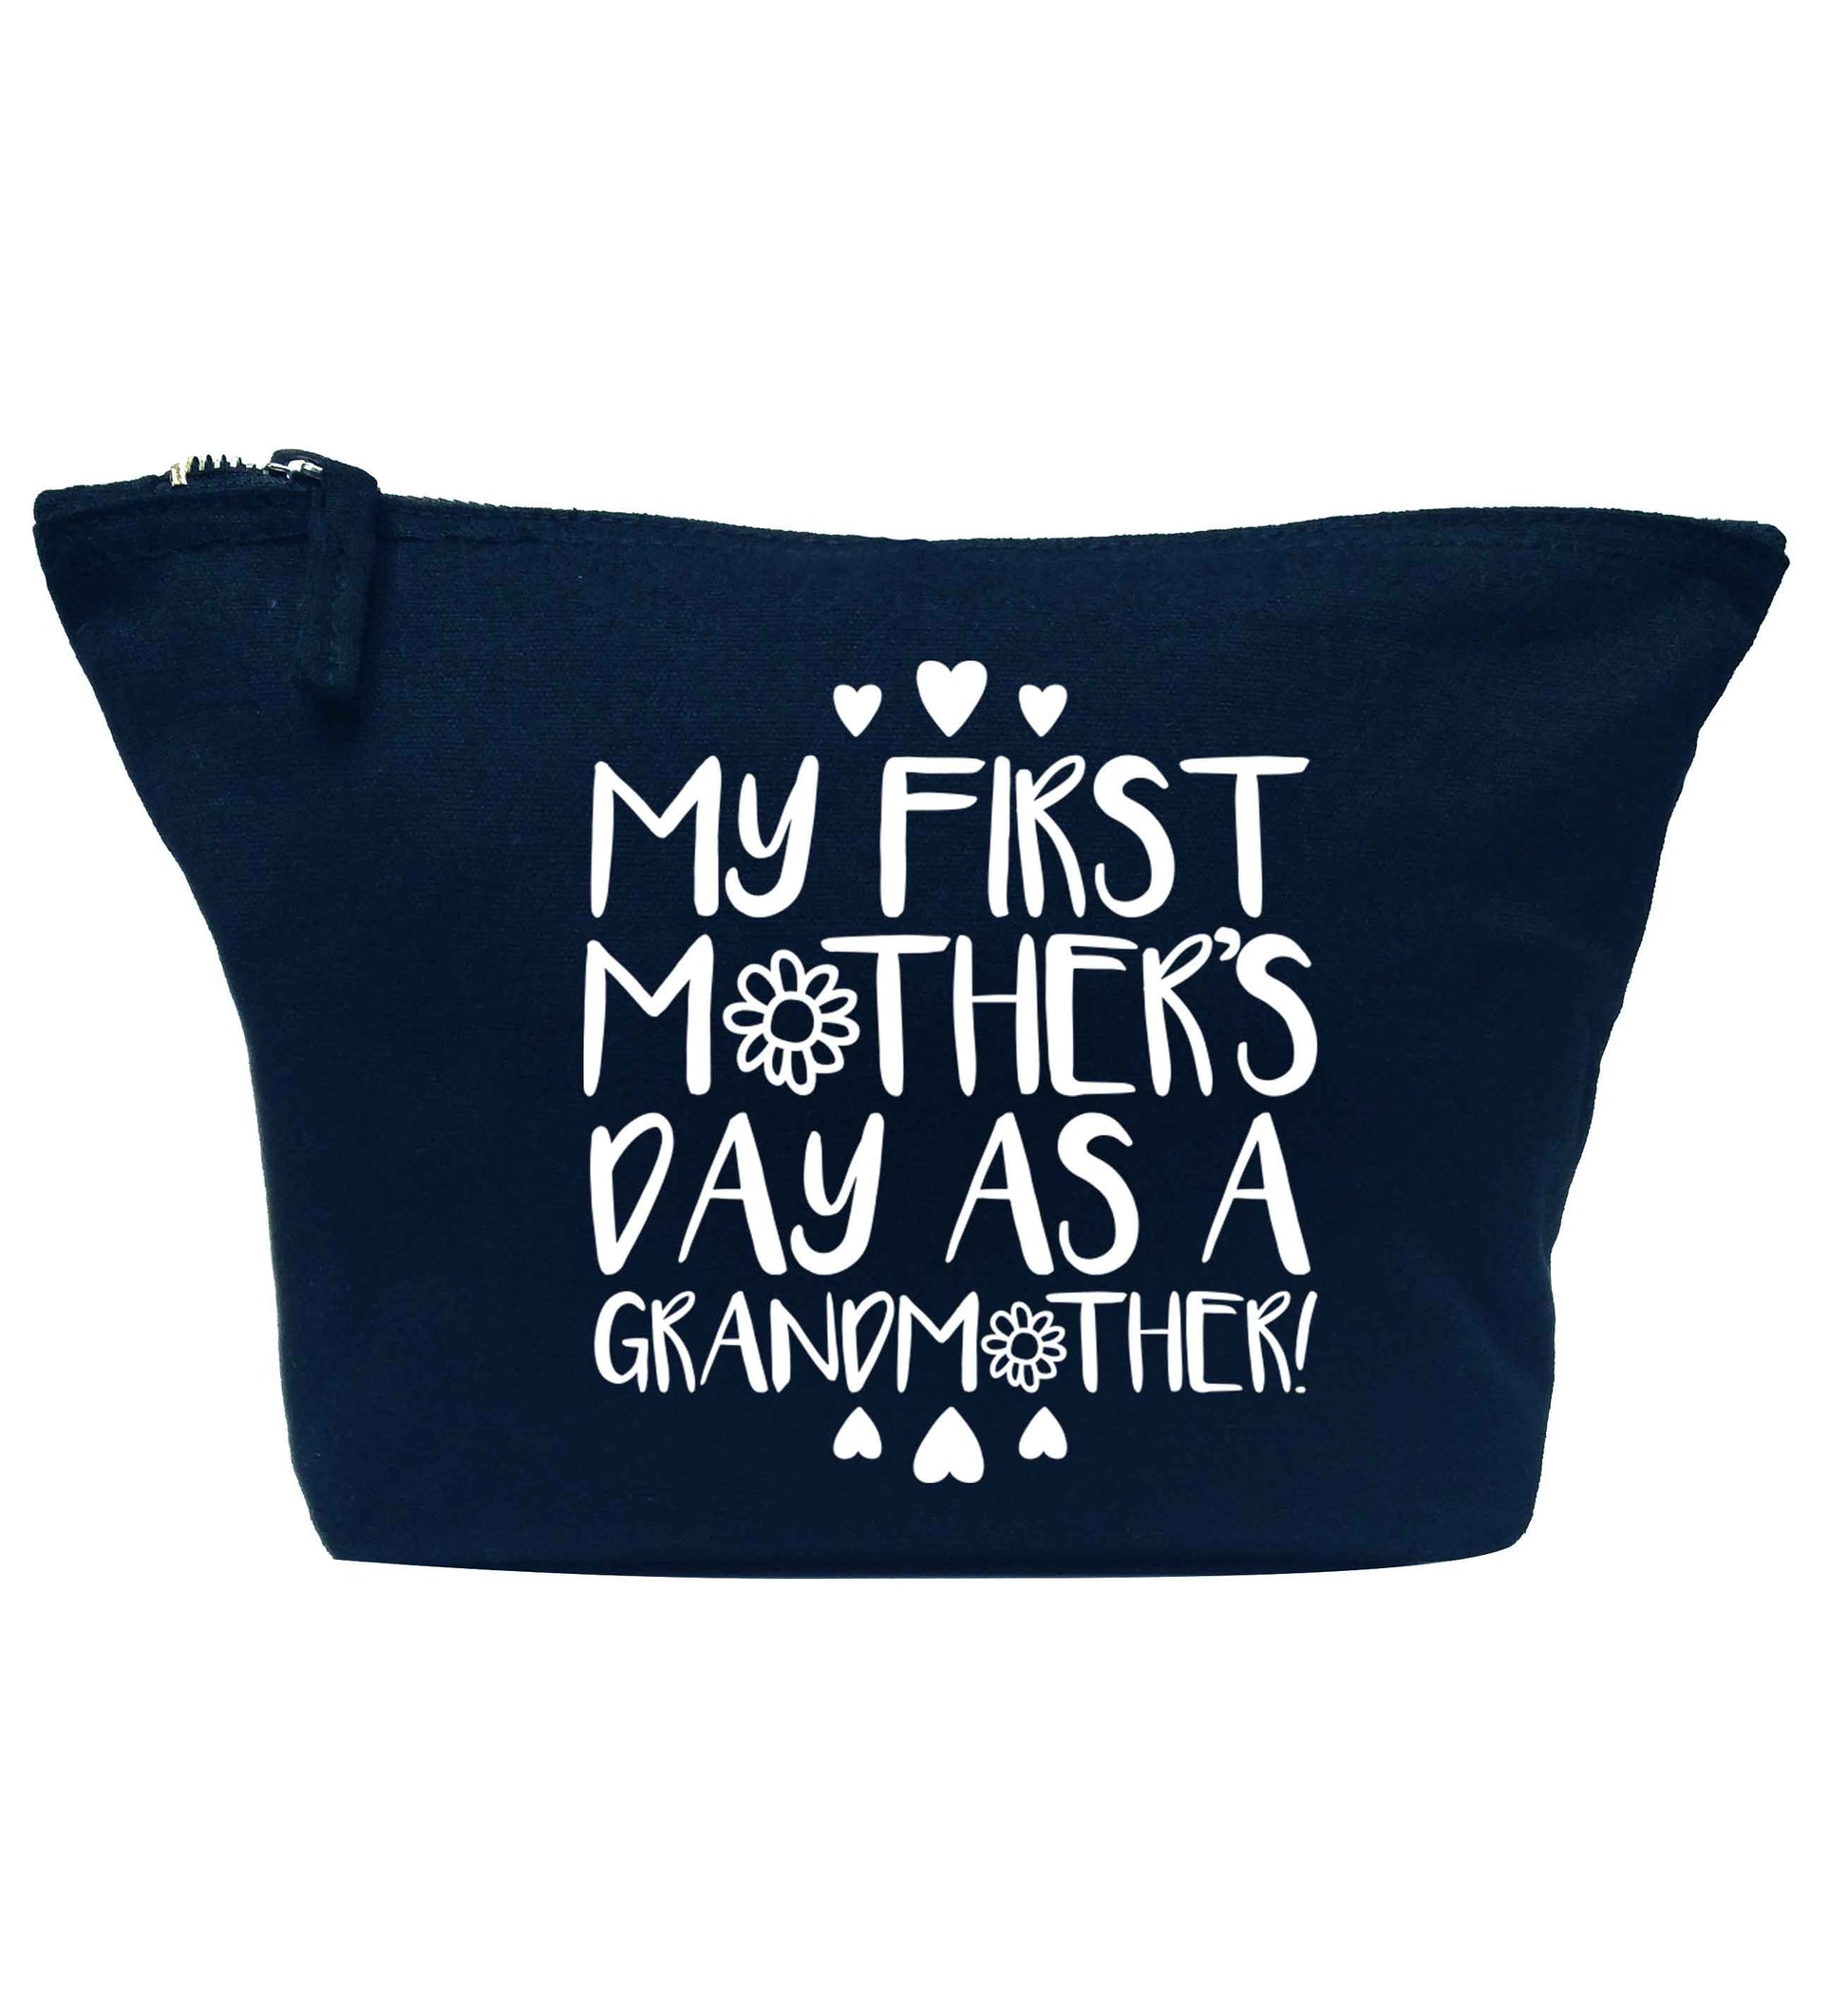 It's my first mother's day as a grandmother navy makeup bag